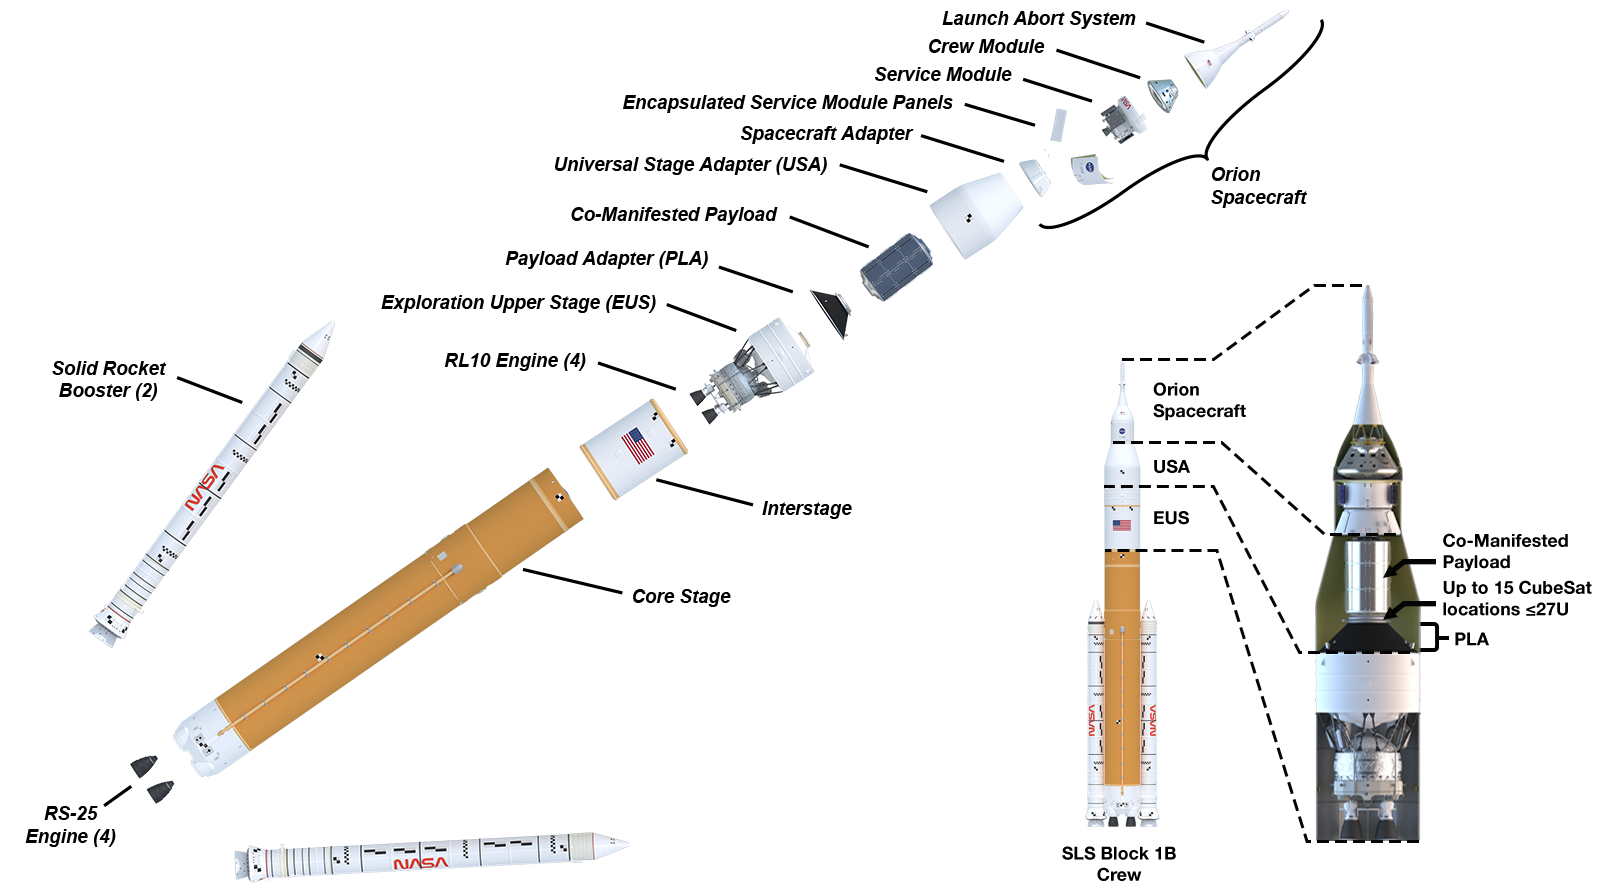 Expanded view diagram of the SLS (Space Launch System) Block 1B rocket crew configuration illustrating discrete rocket components and their location within the stacked rocket. Indicated, from bottom to top, are call-outs for the four RS-25 engines, two solid rocket boosters to either side of the core stage, interstage, exploration upper stage (EUS) with its four RL-10 engines, payload adapter (PLA), co-manifested payload (exemplified for this illustration with a rendering of Lunar I-Hab) below the universal stage adapter (USA), and finally the Orion spacecraft with its spacecraft adapter, encapsulated service model panels, service module, crew module, and launch abort system.